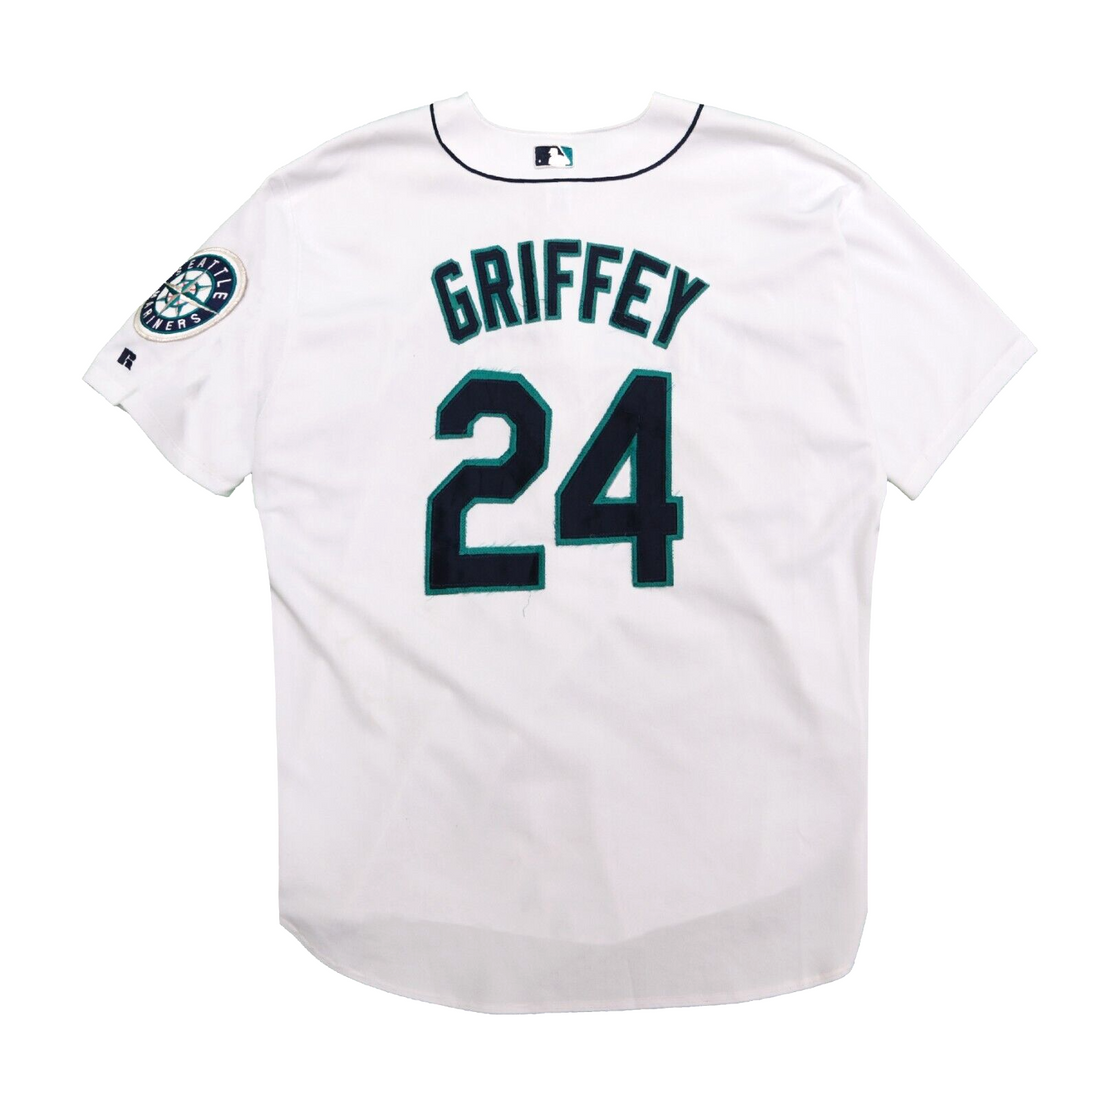 Vintage Seattle Mariners Ken Griffey Jr Authentic Russell Jersey